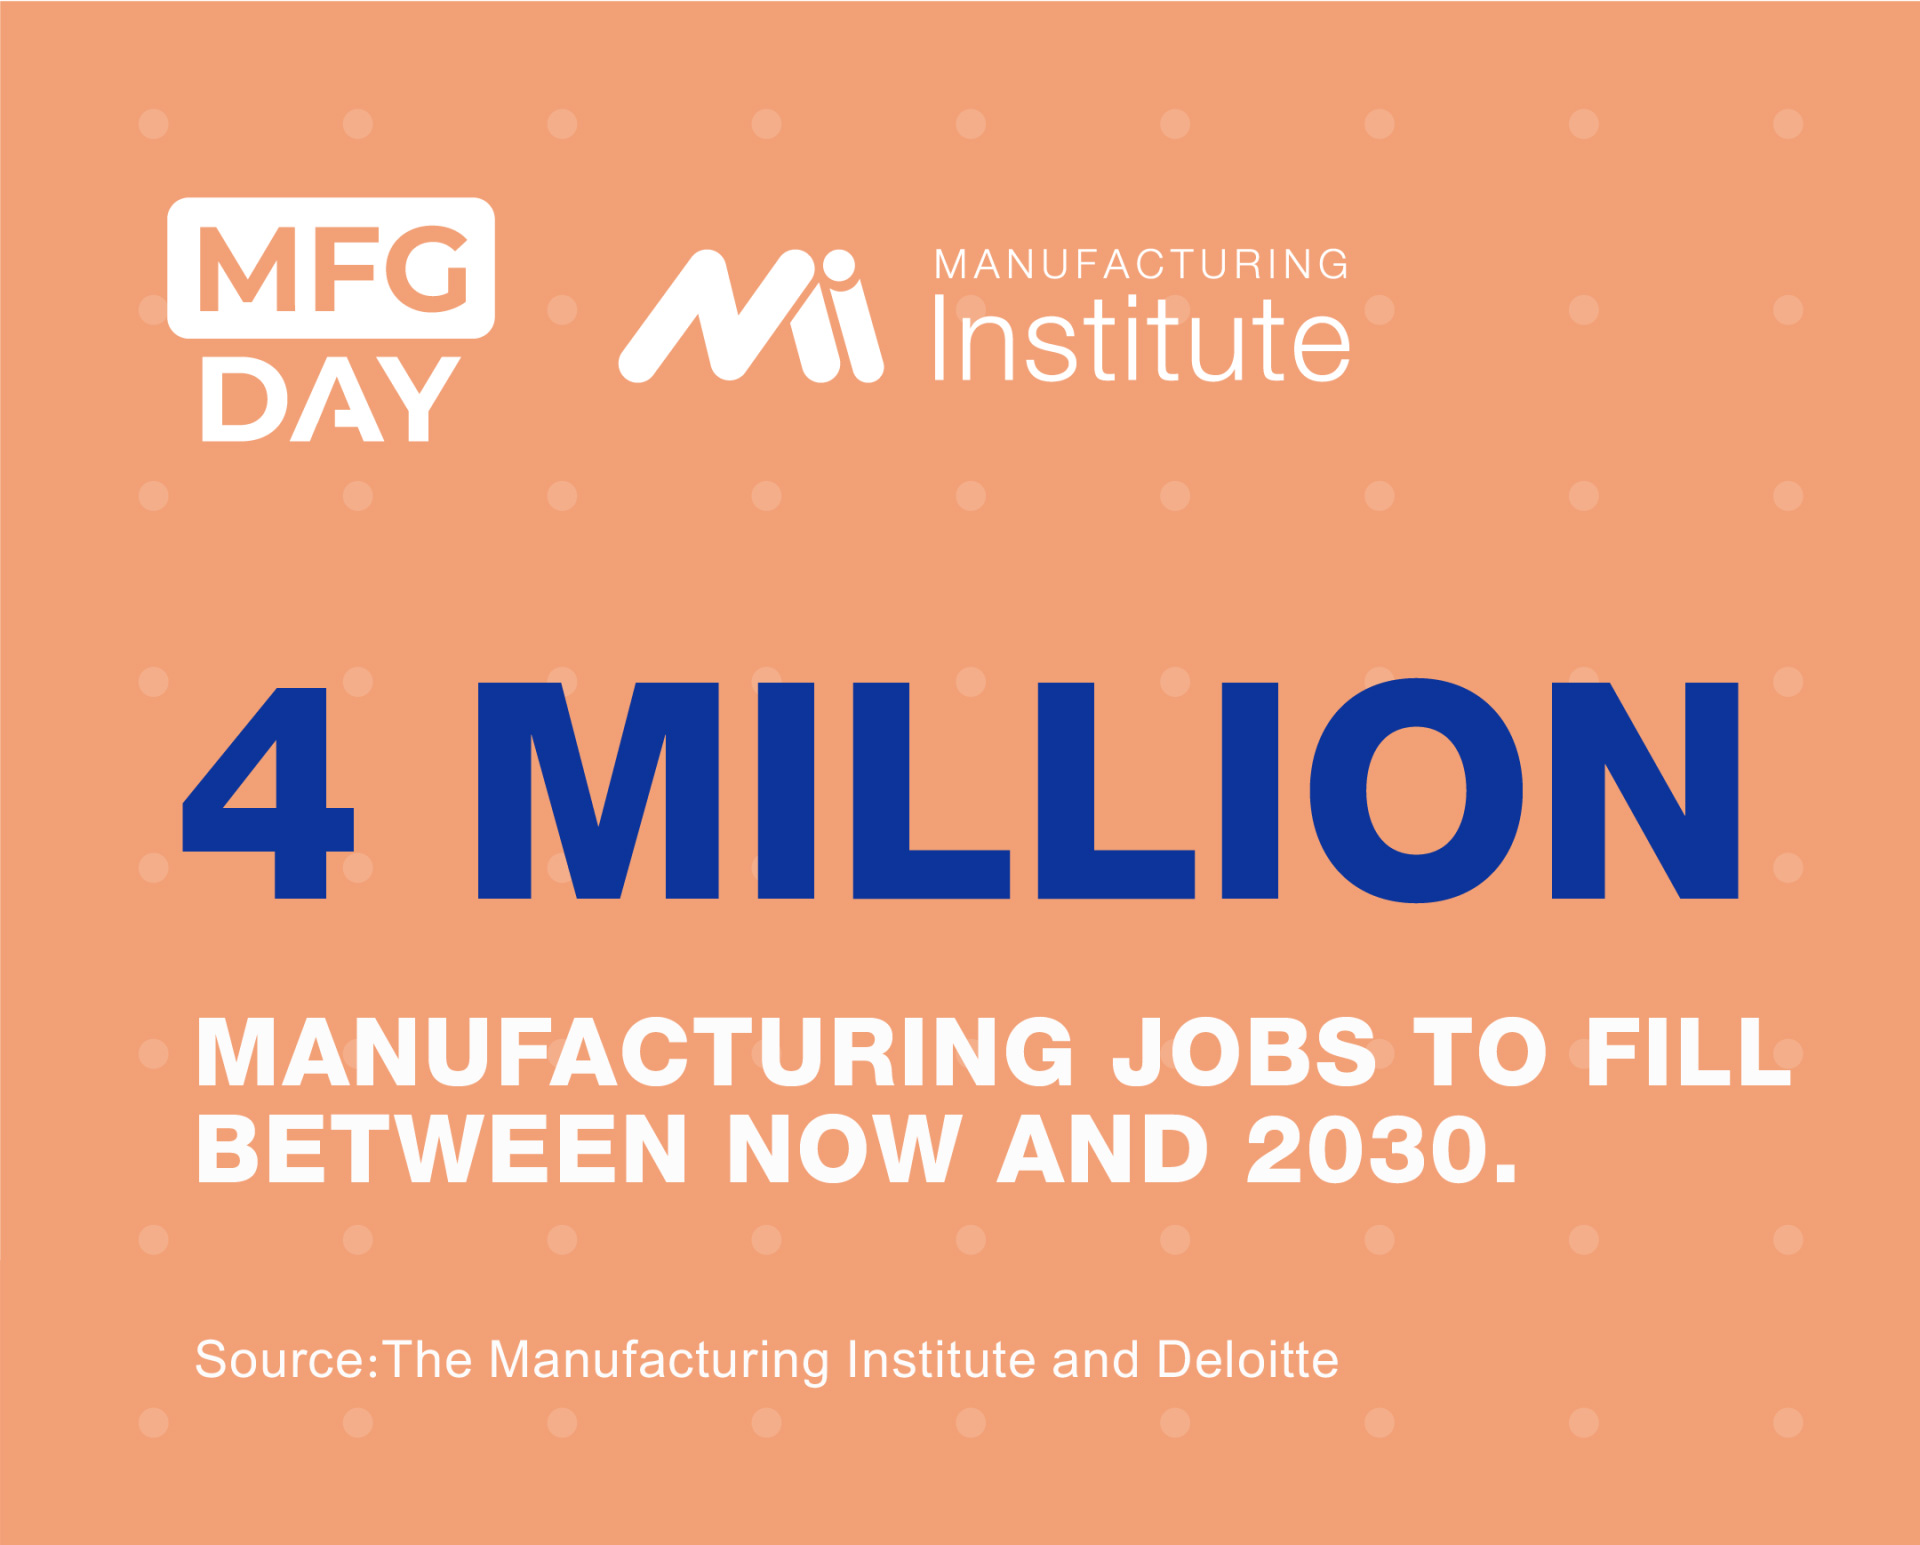 Graphic for MFG Day by Manufacturing Institute and Deloitte